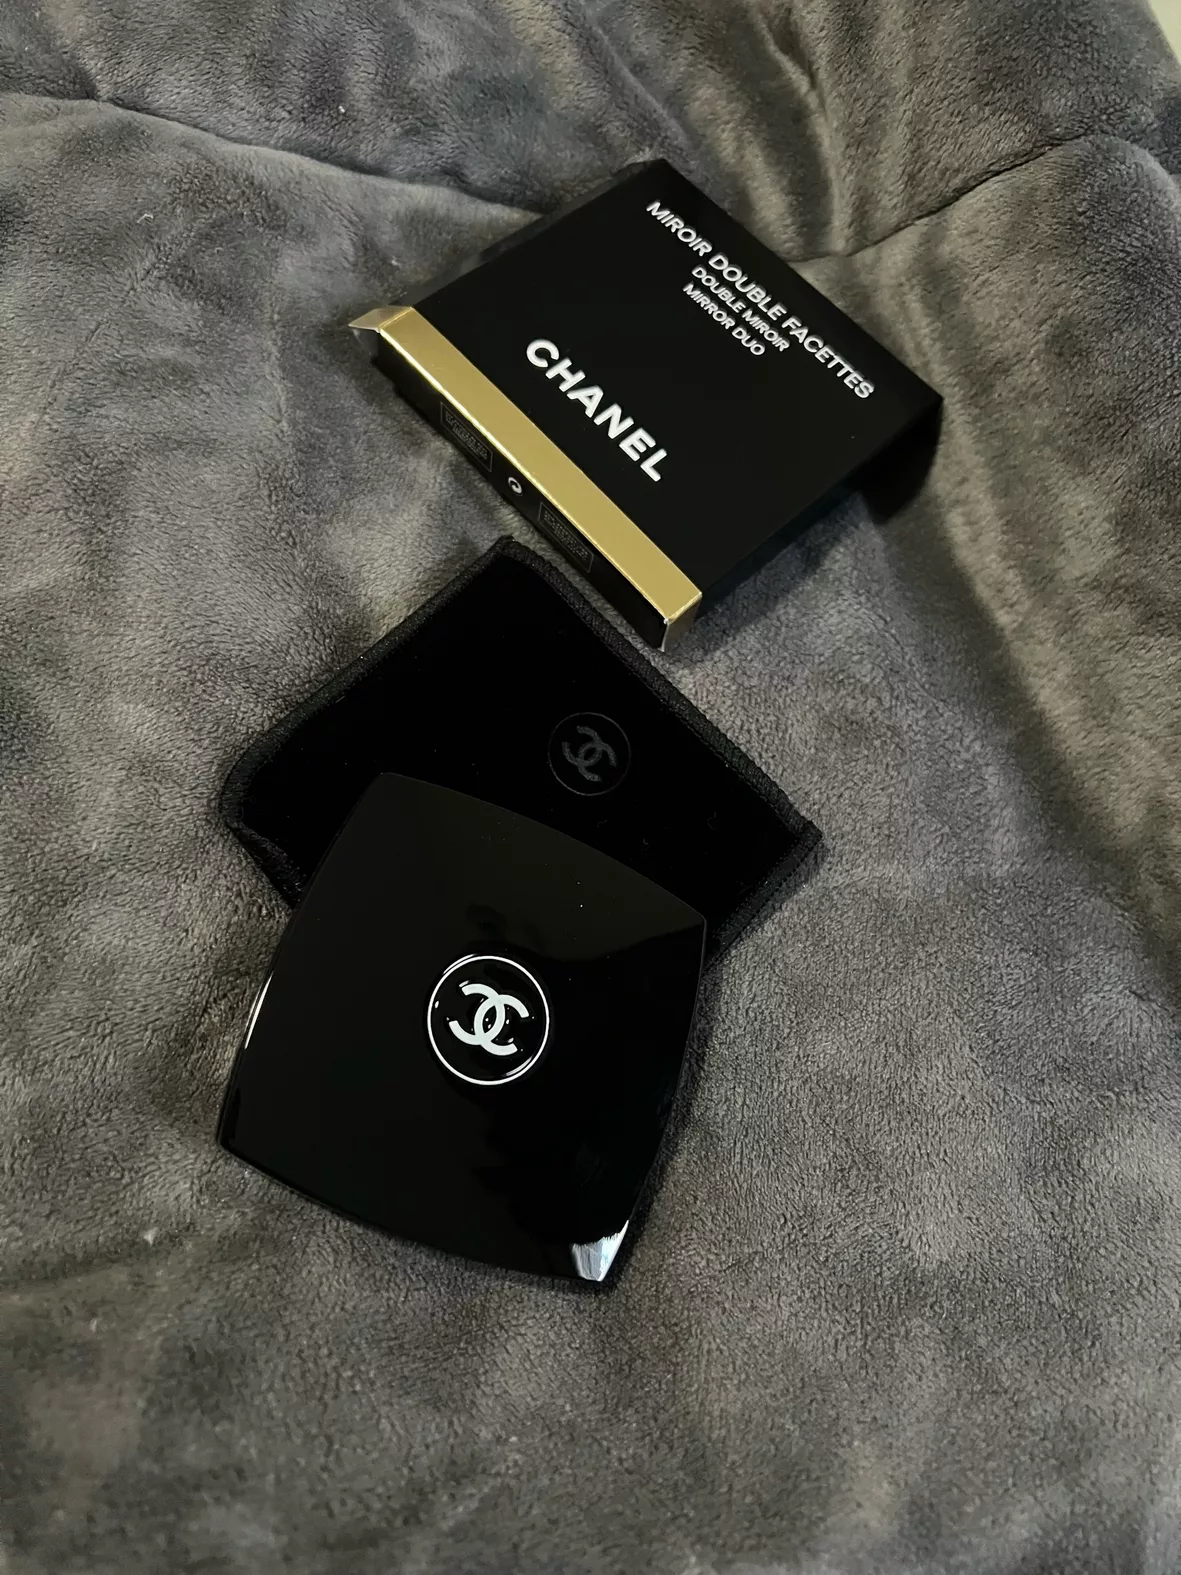 chanel double compact mirror